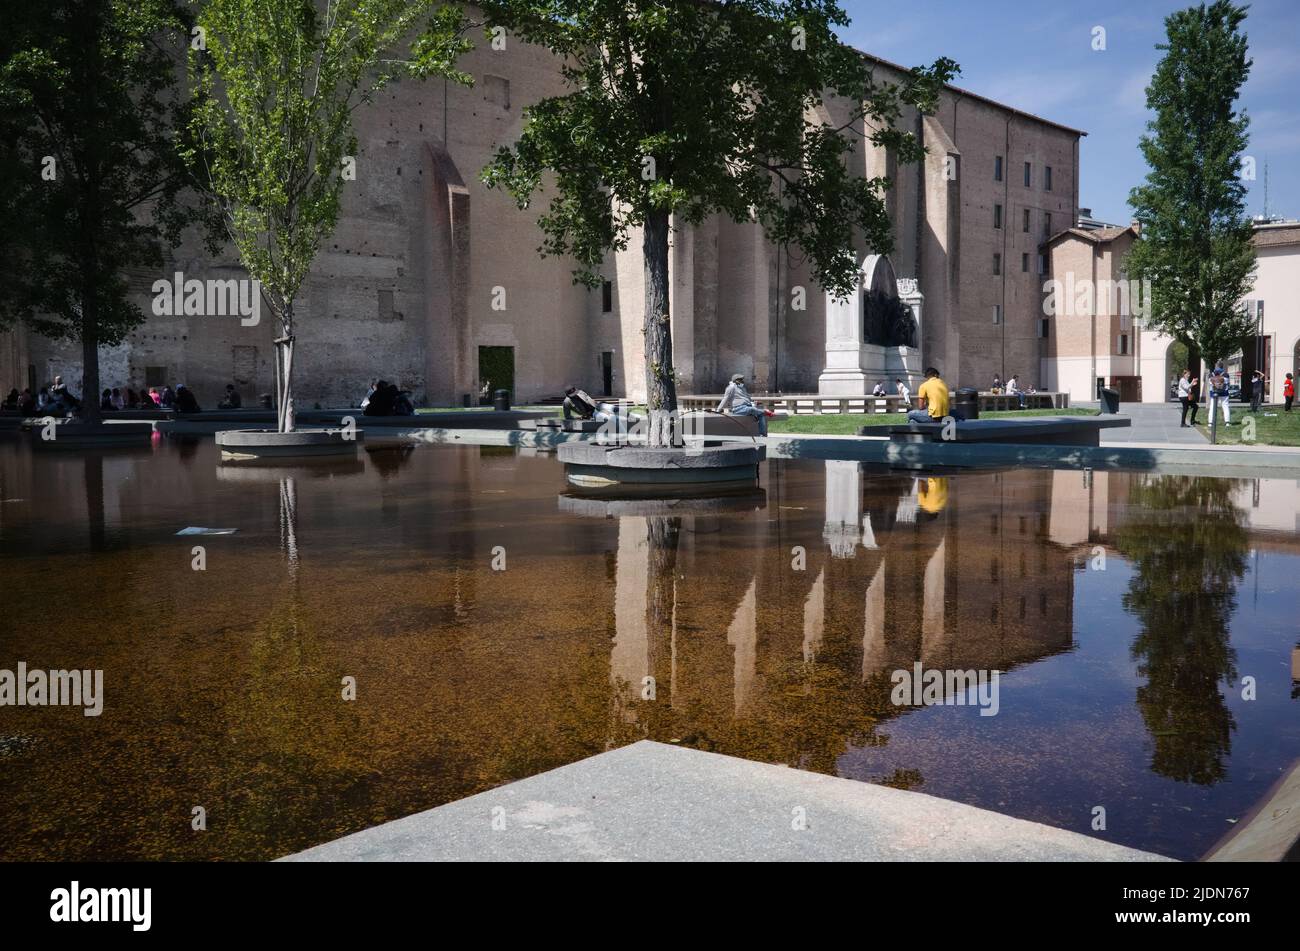 Parma, Italy - May, 2022: Fountain with trees in Piazza della Pace square in old town on site of Roman ruins of Chiesa di San Pietro Church Stock Photo